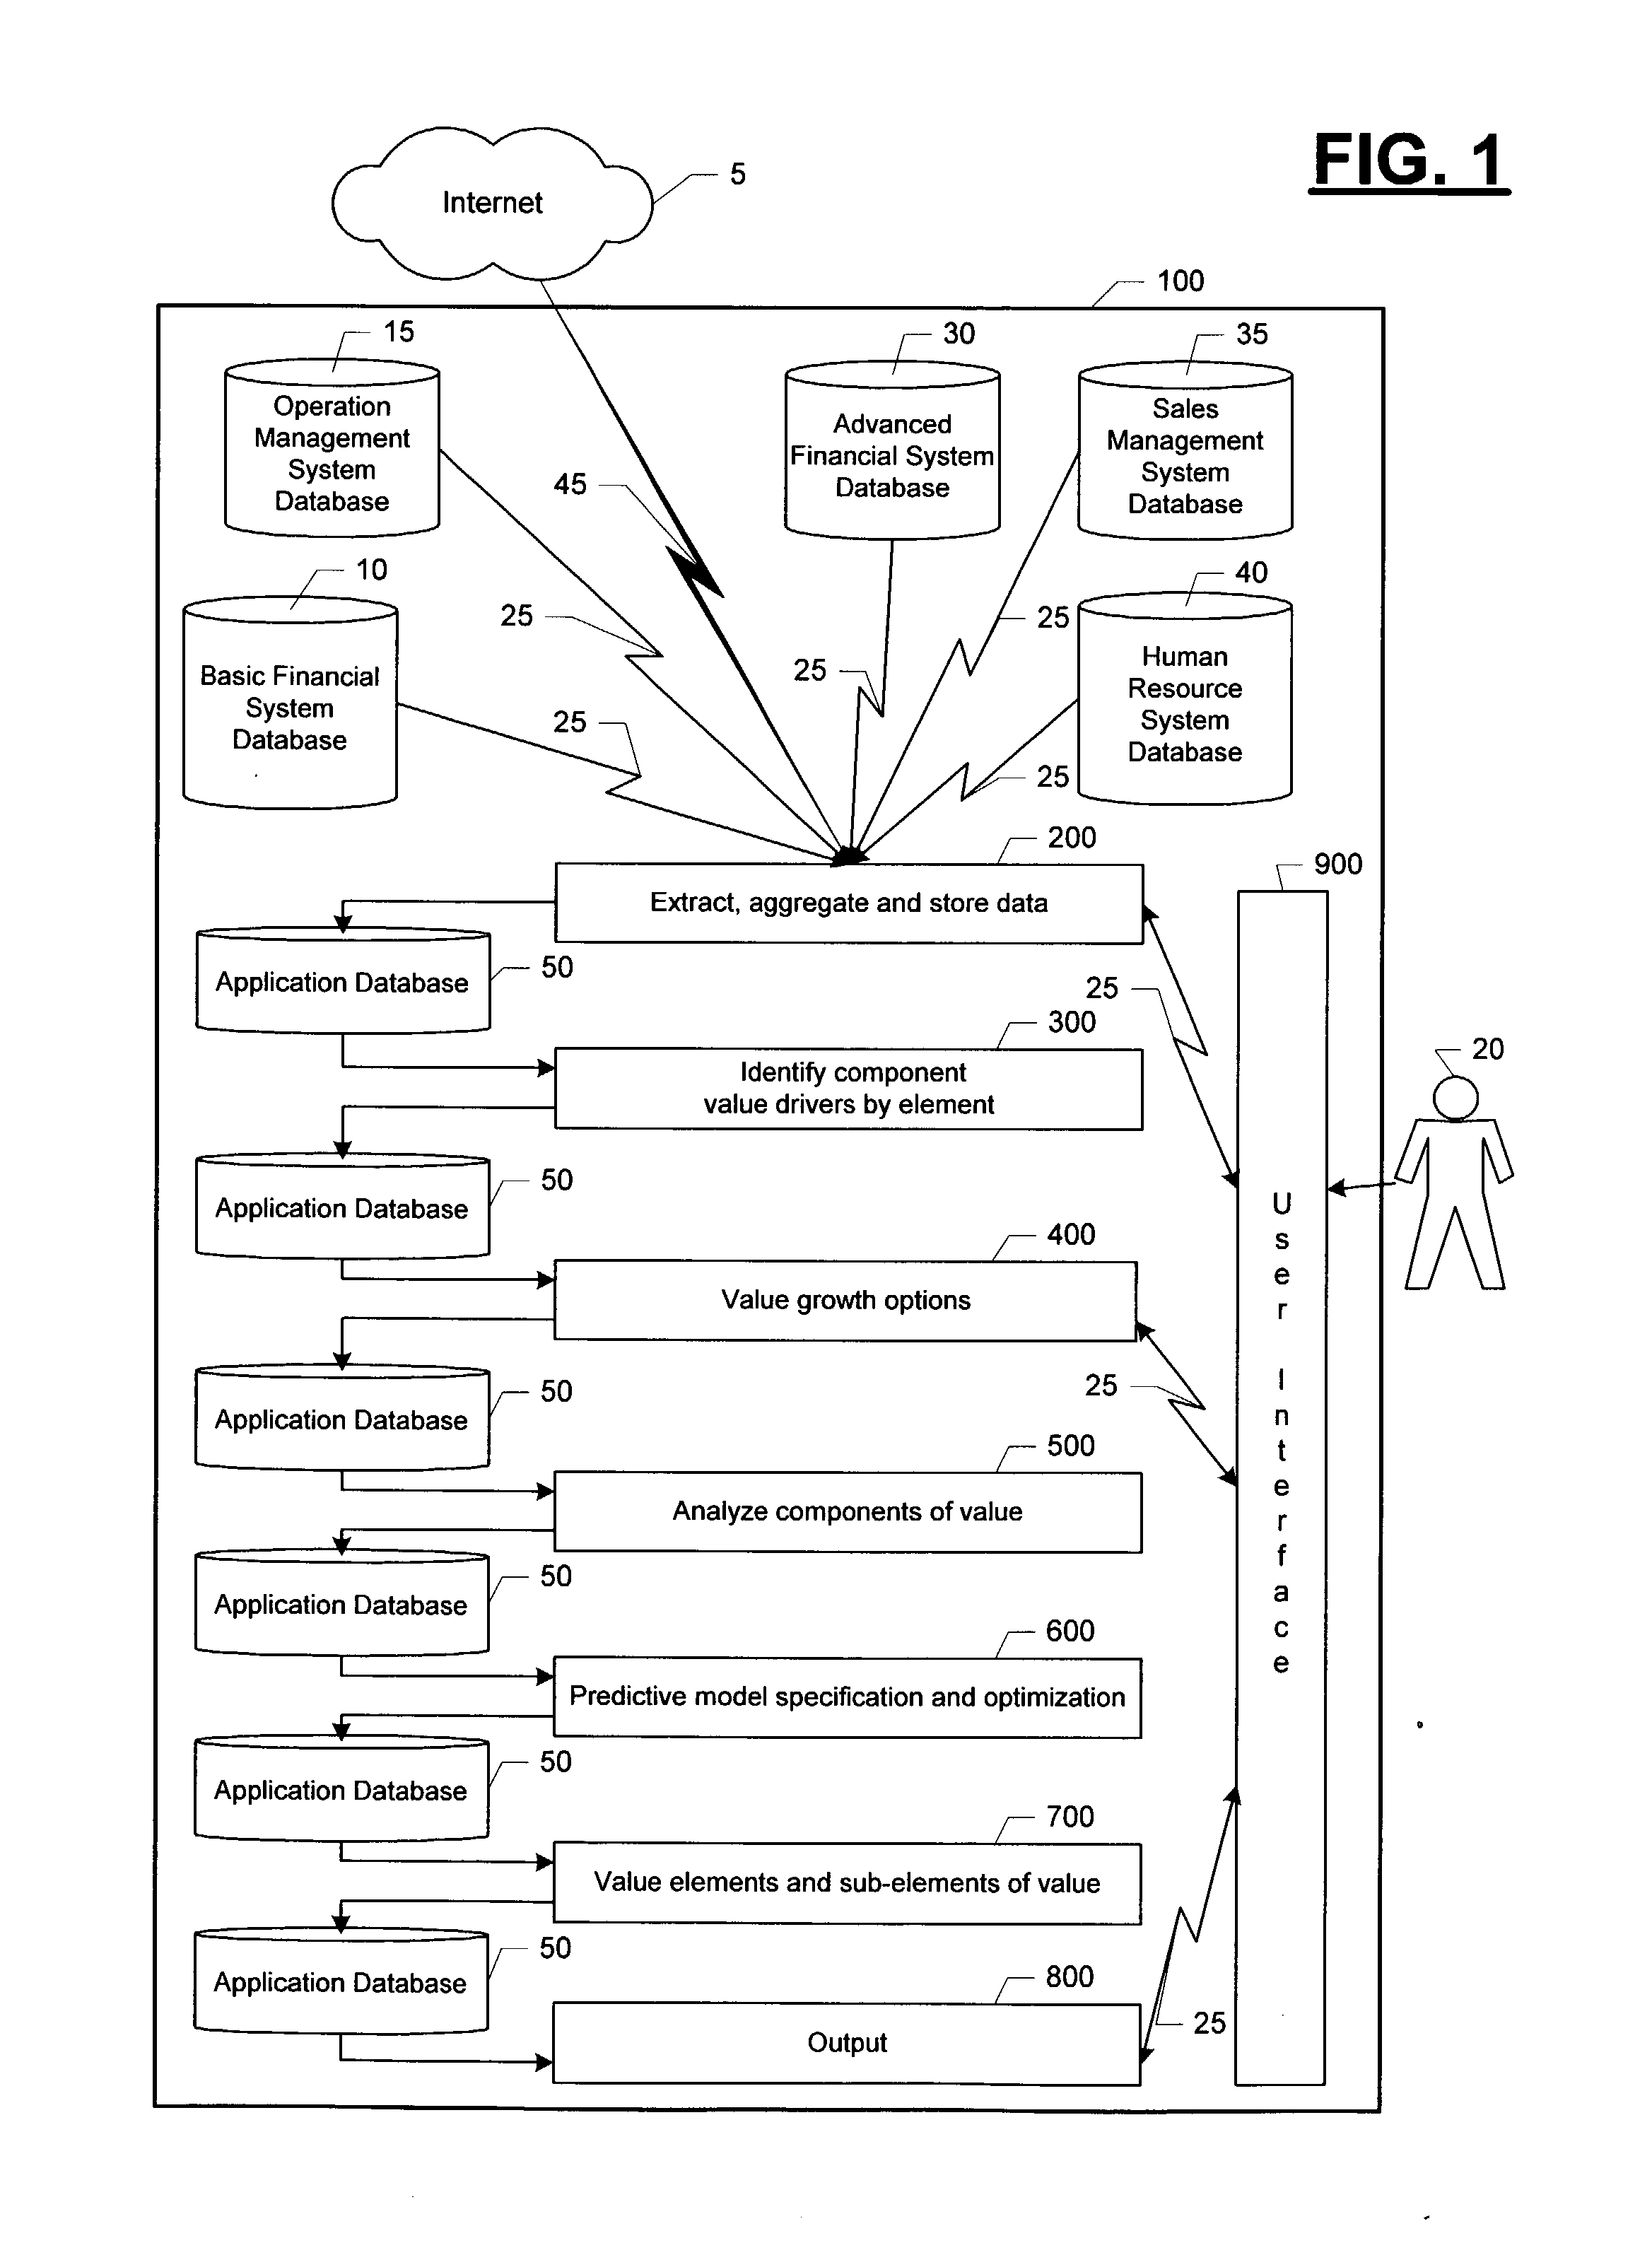 Method of and system for analyzing, modeling and valuing elements of a business enterprise